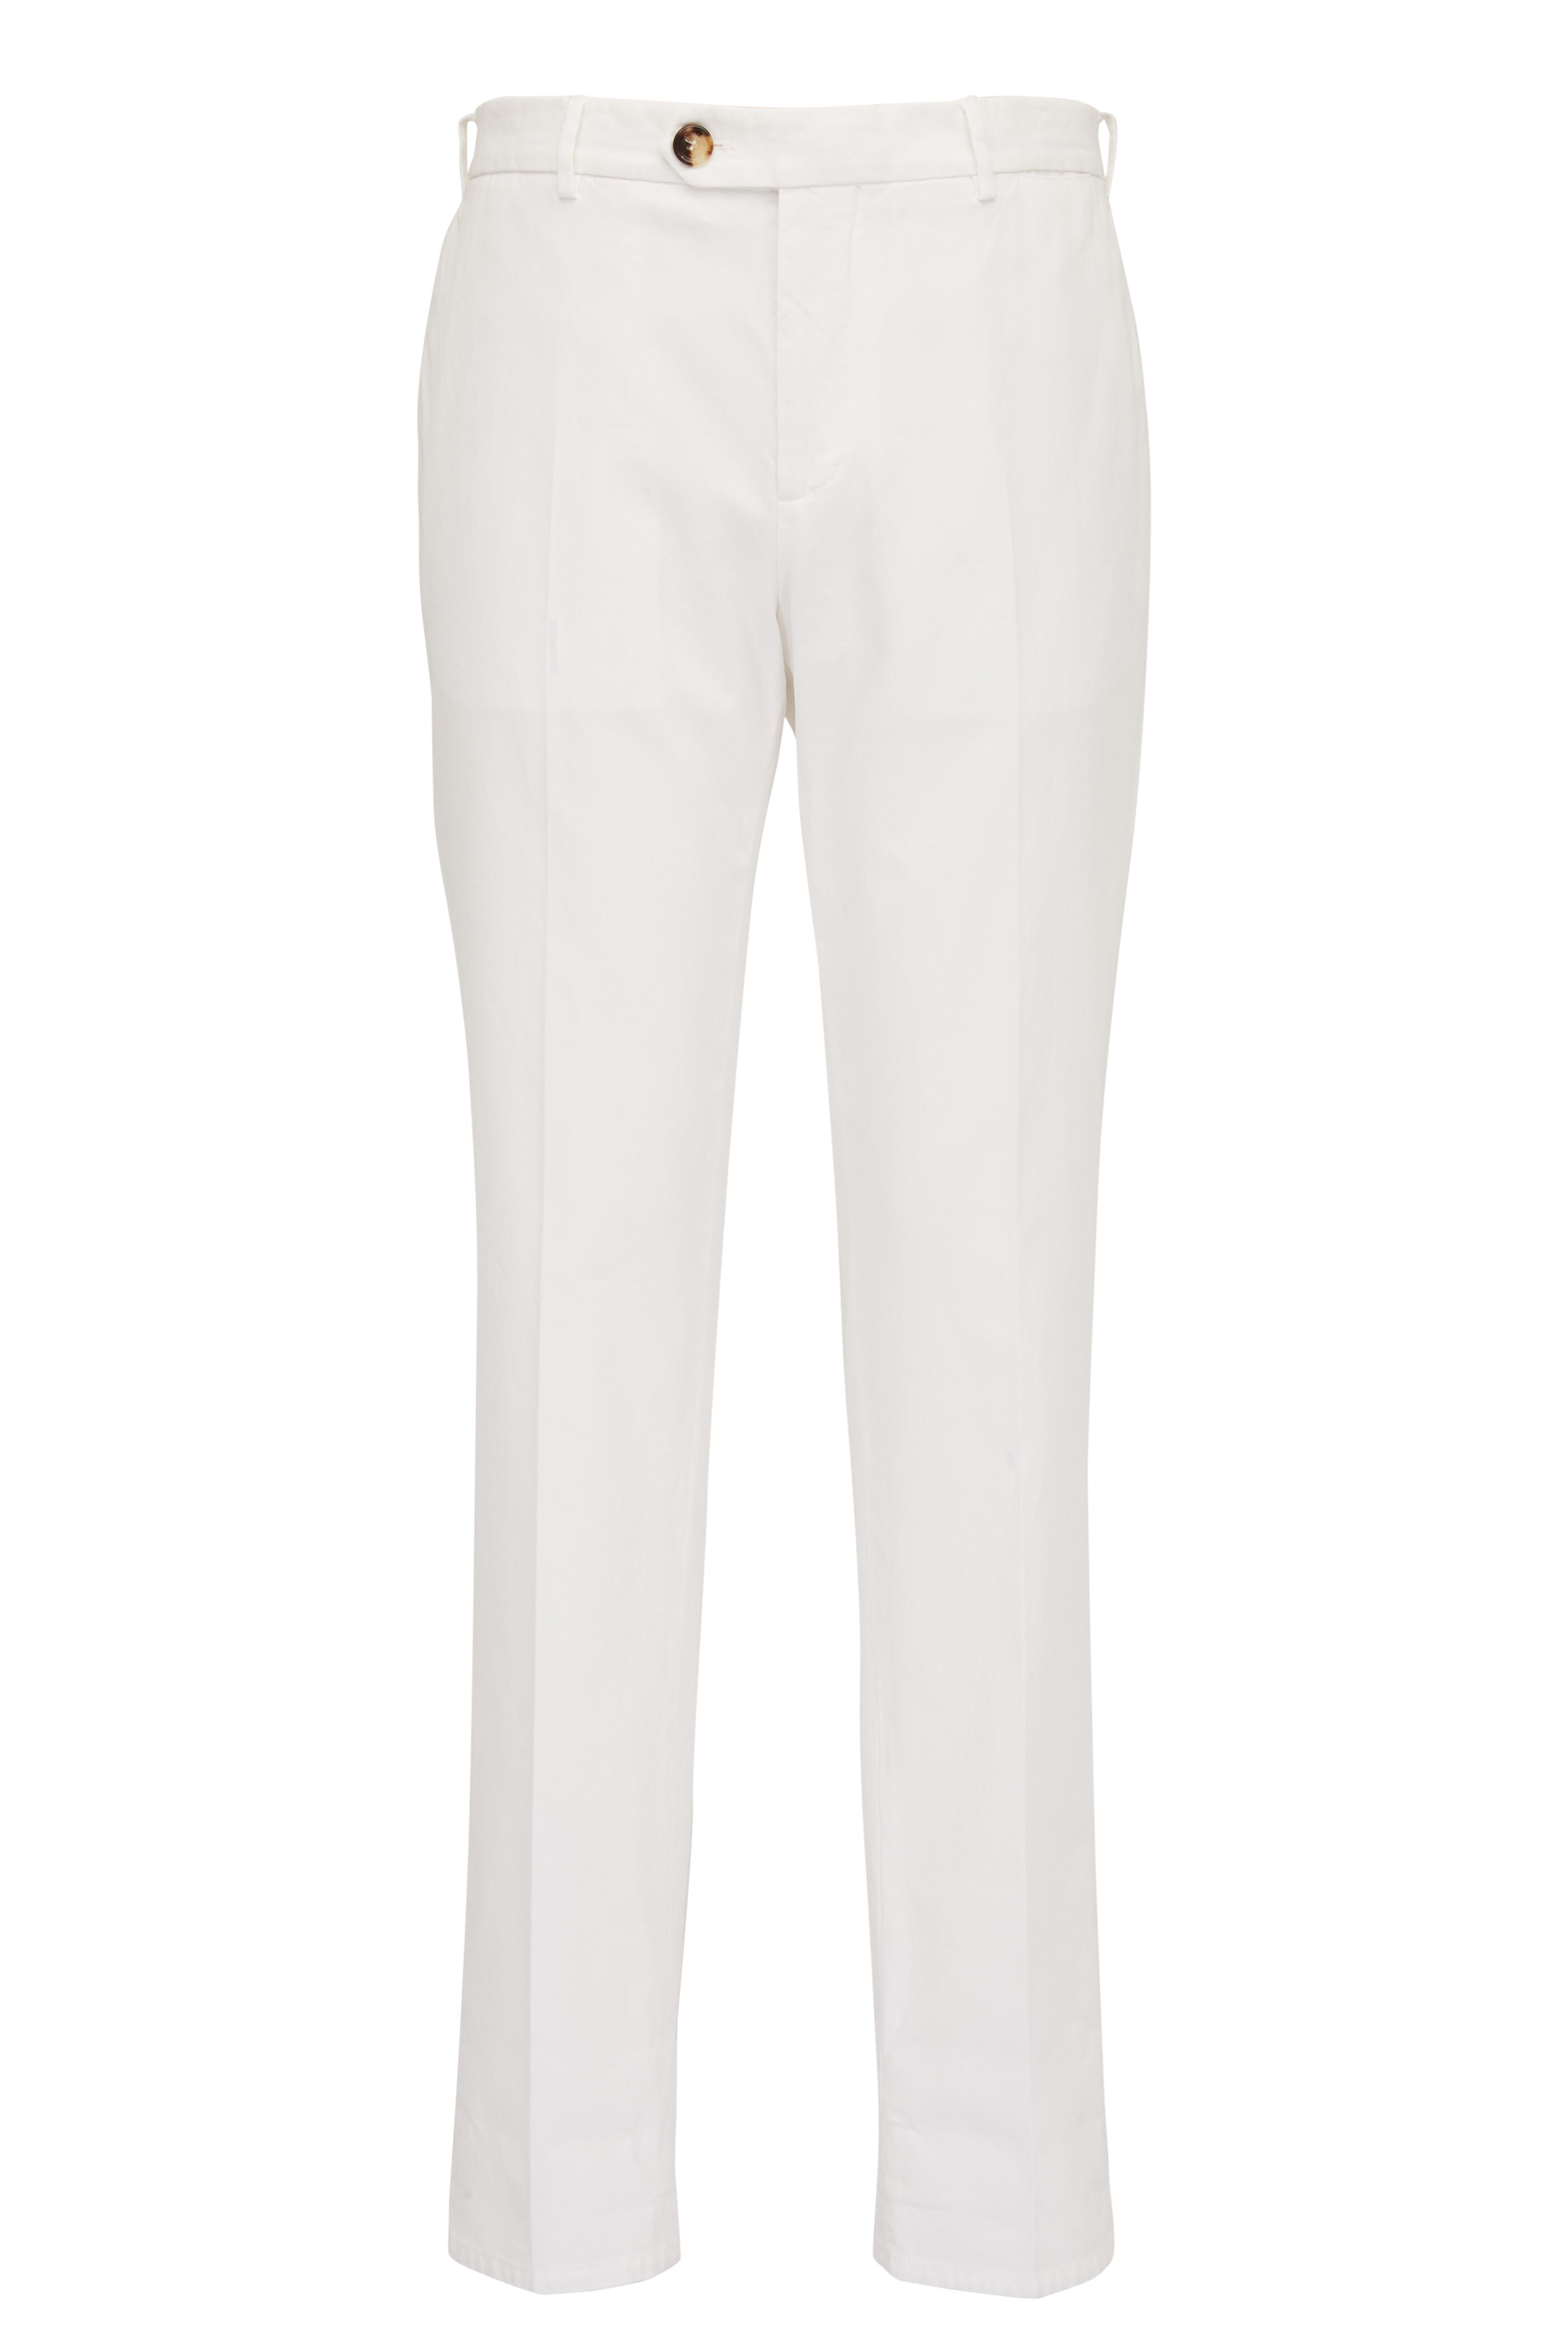 Brunello Cucinelli - White Flat Front Italian Fit Pant